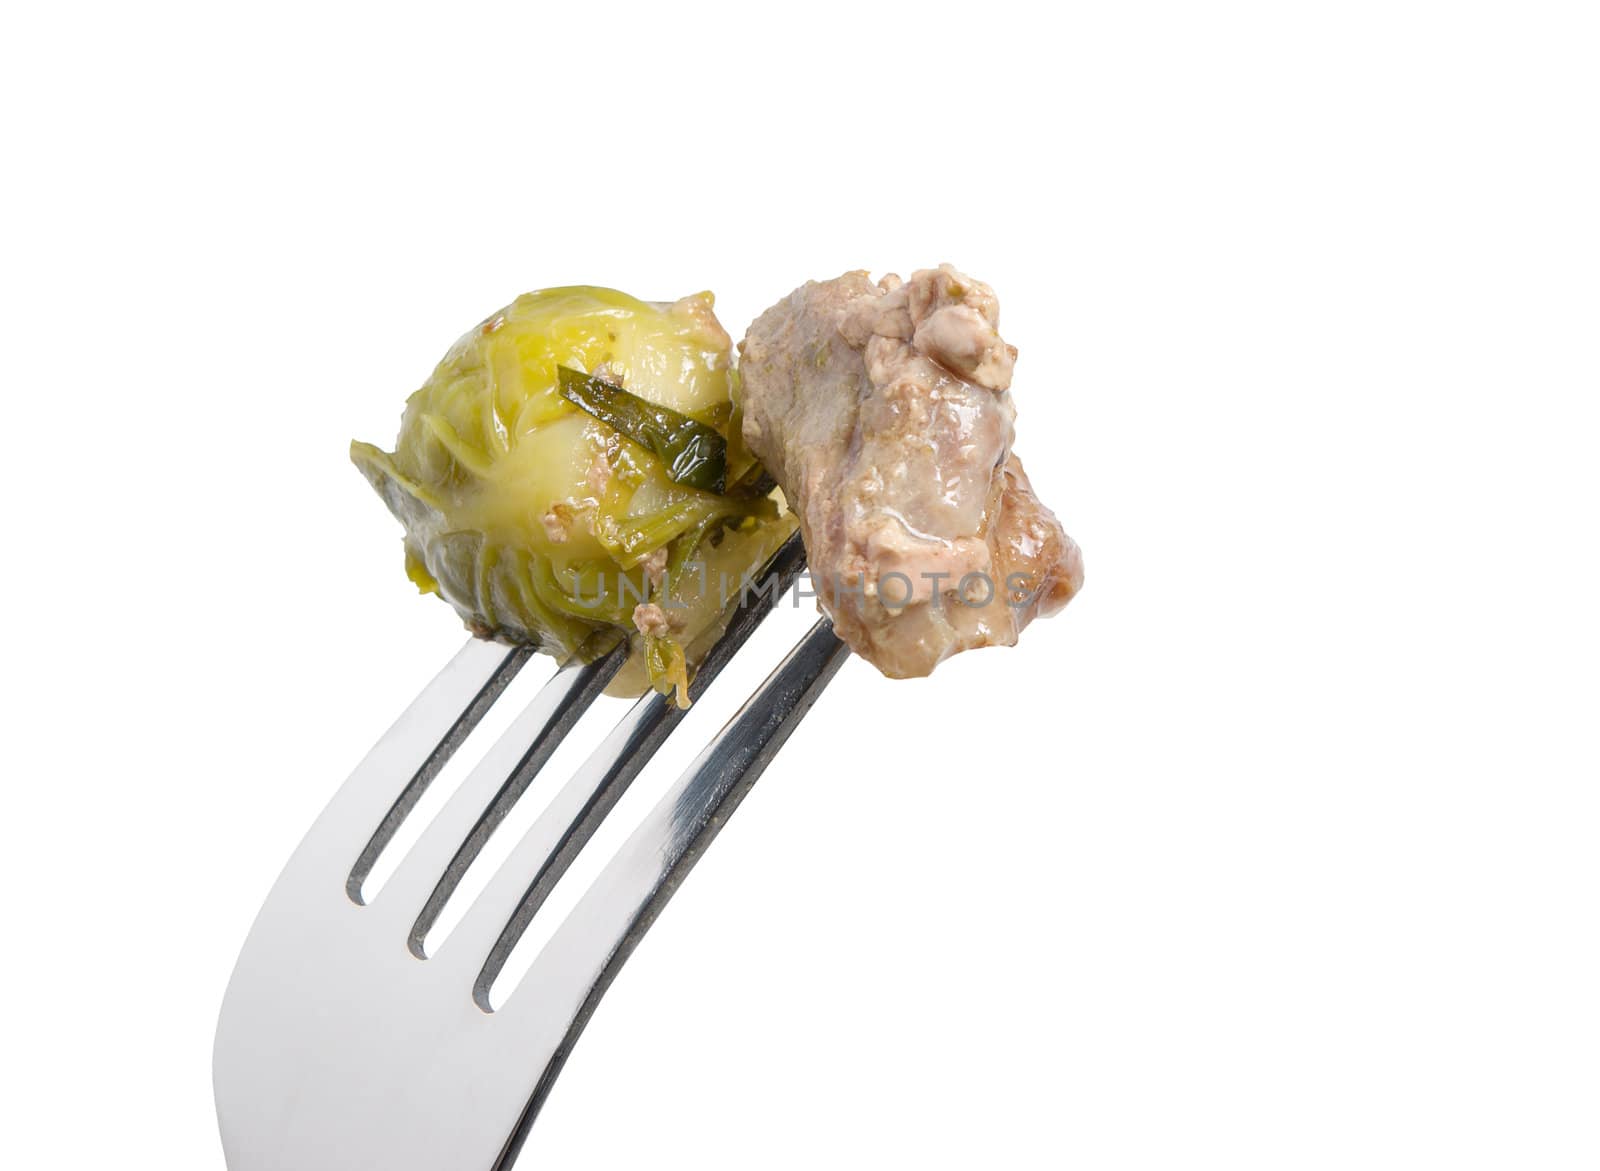 Meat and brussels sprouts on fork.a white background